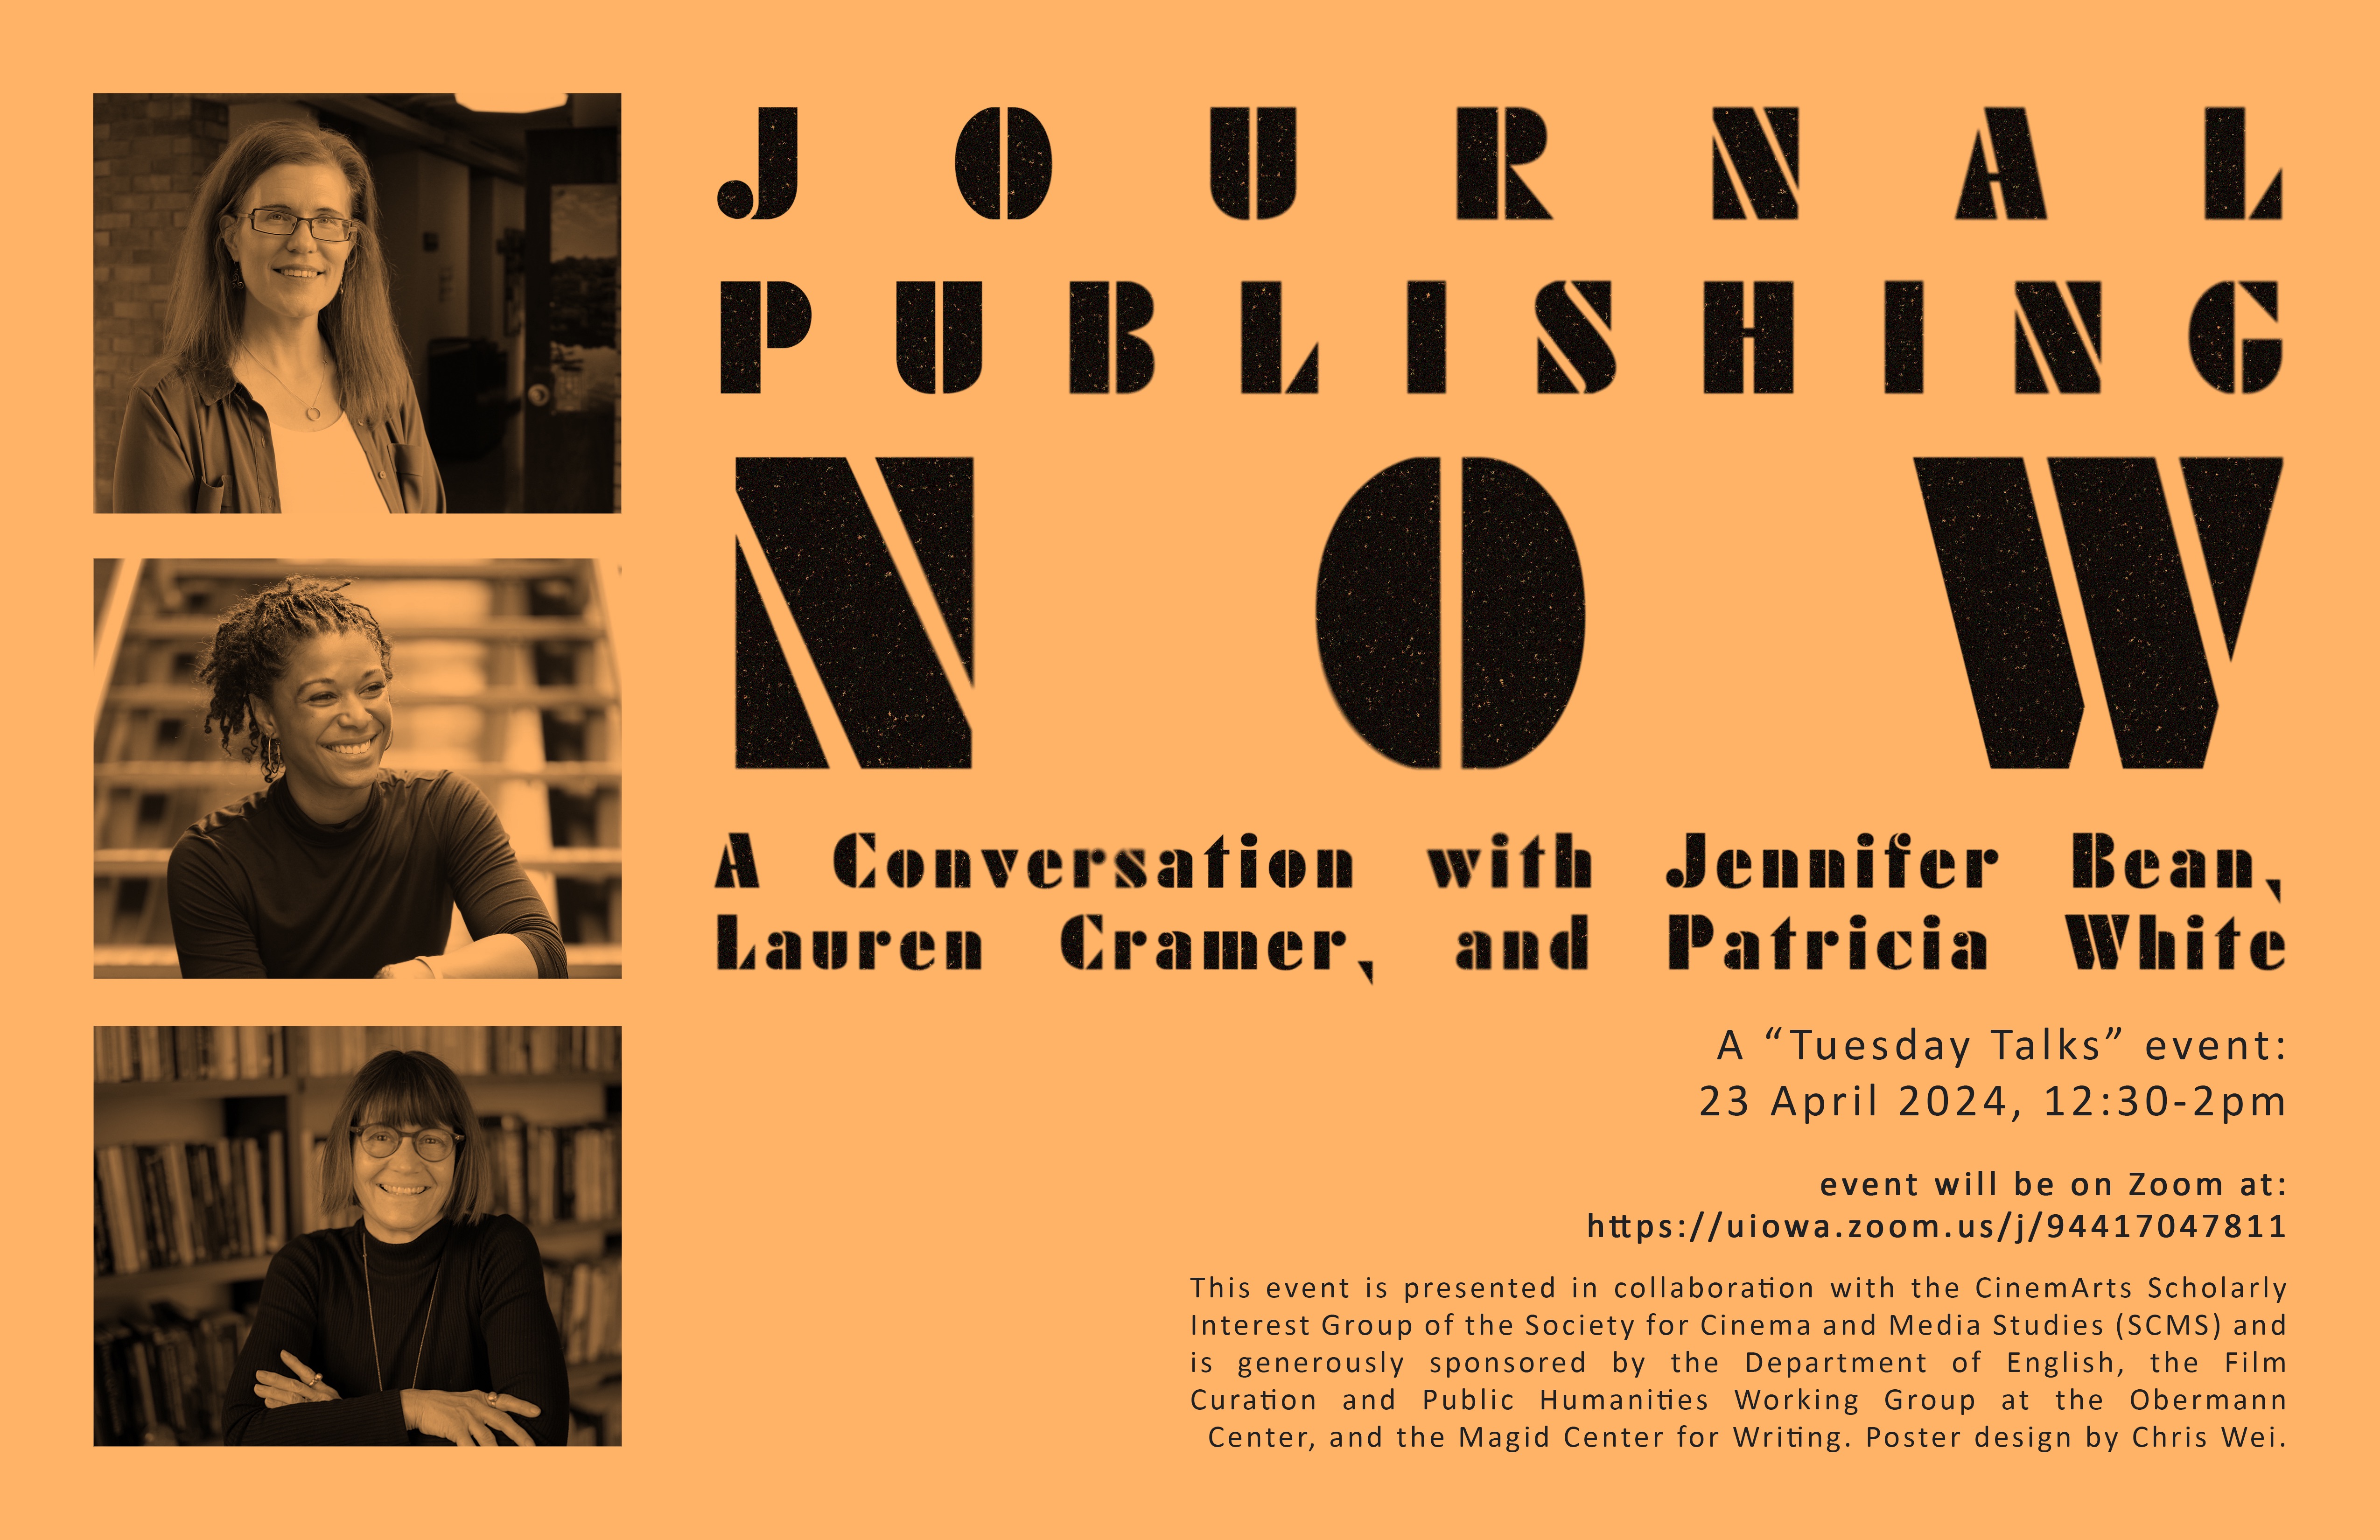 Journal Publishing Now: A Conversation with Jennifer Bean, Lauren Cramer, and Patricia White  promotional image